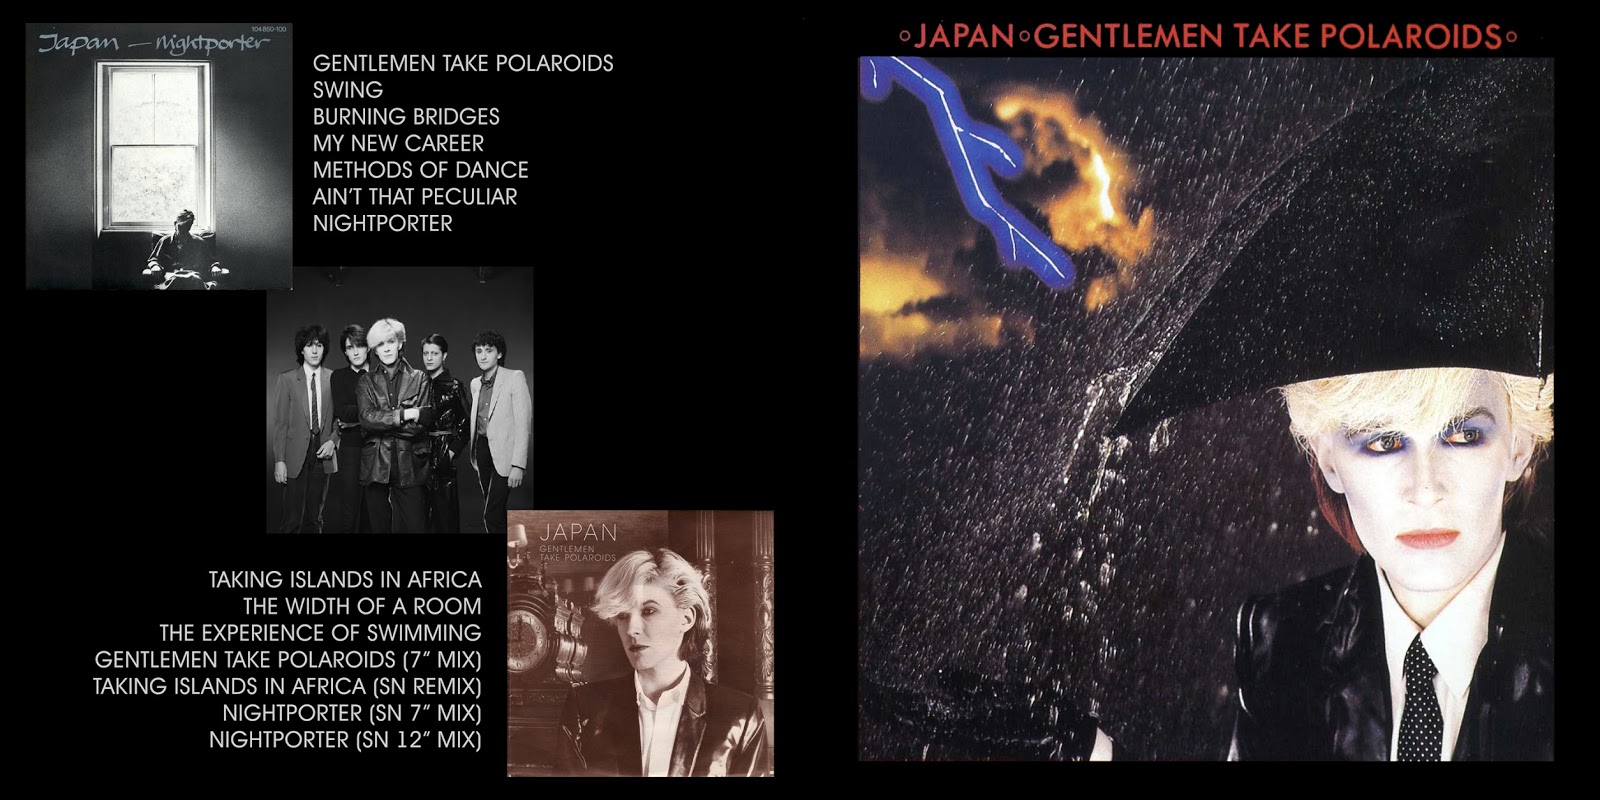 All the Air In My Lungs: Japan - Gentlemen Take Polaroids - 1980